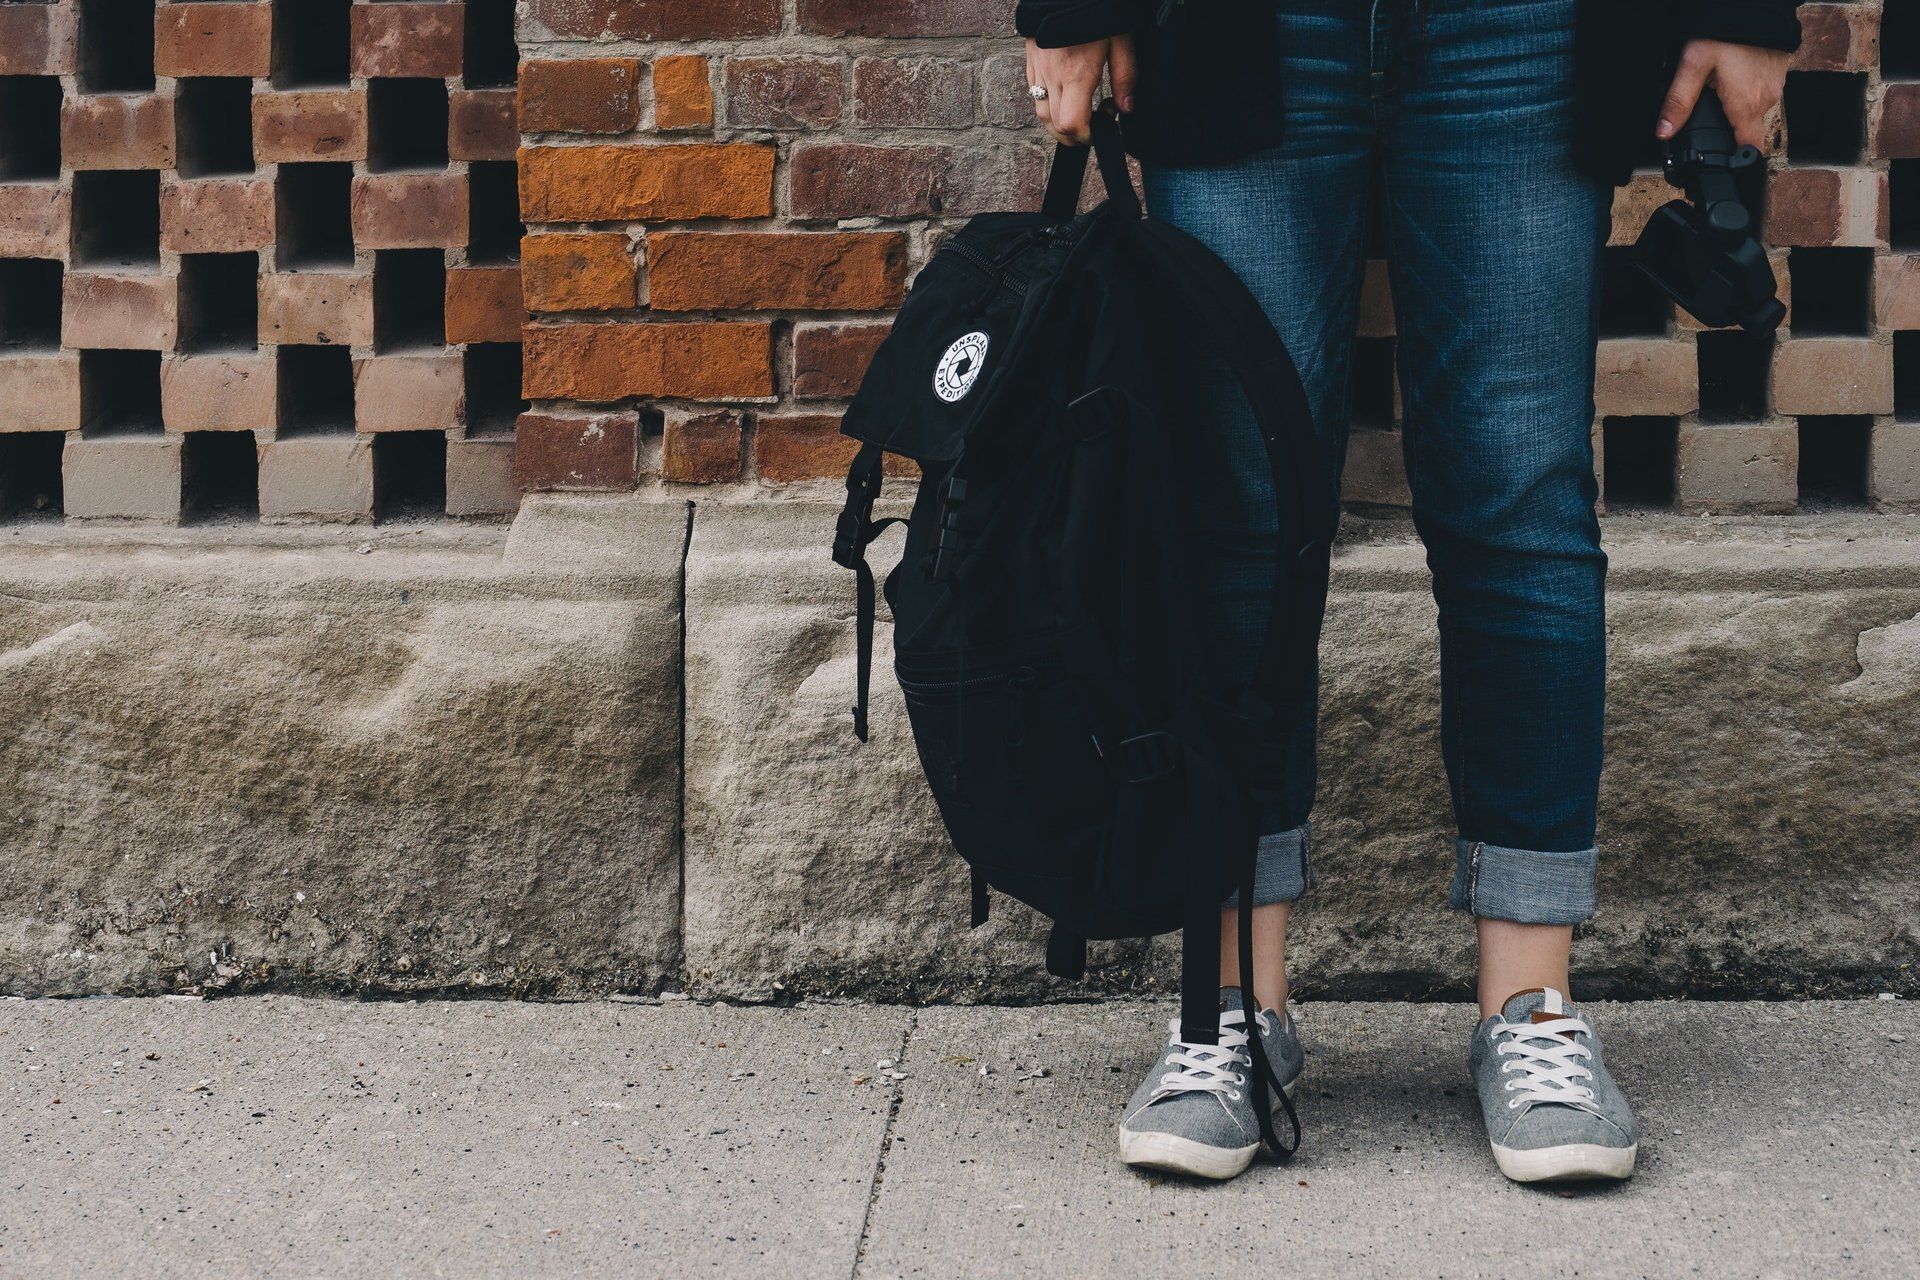 Legs and feet of teen with backpack